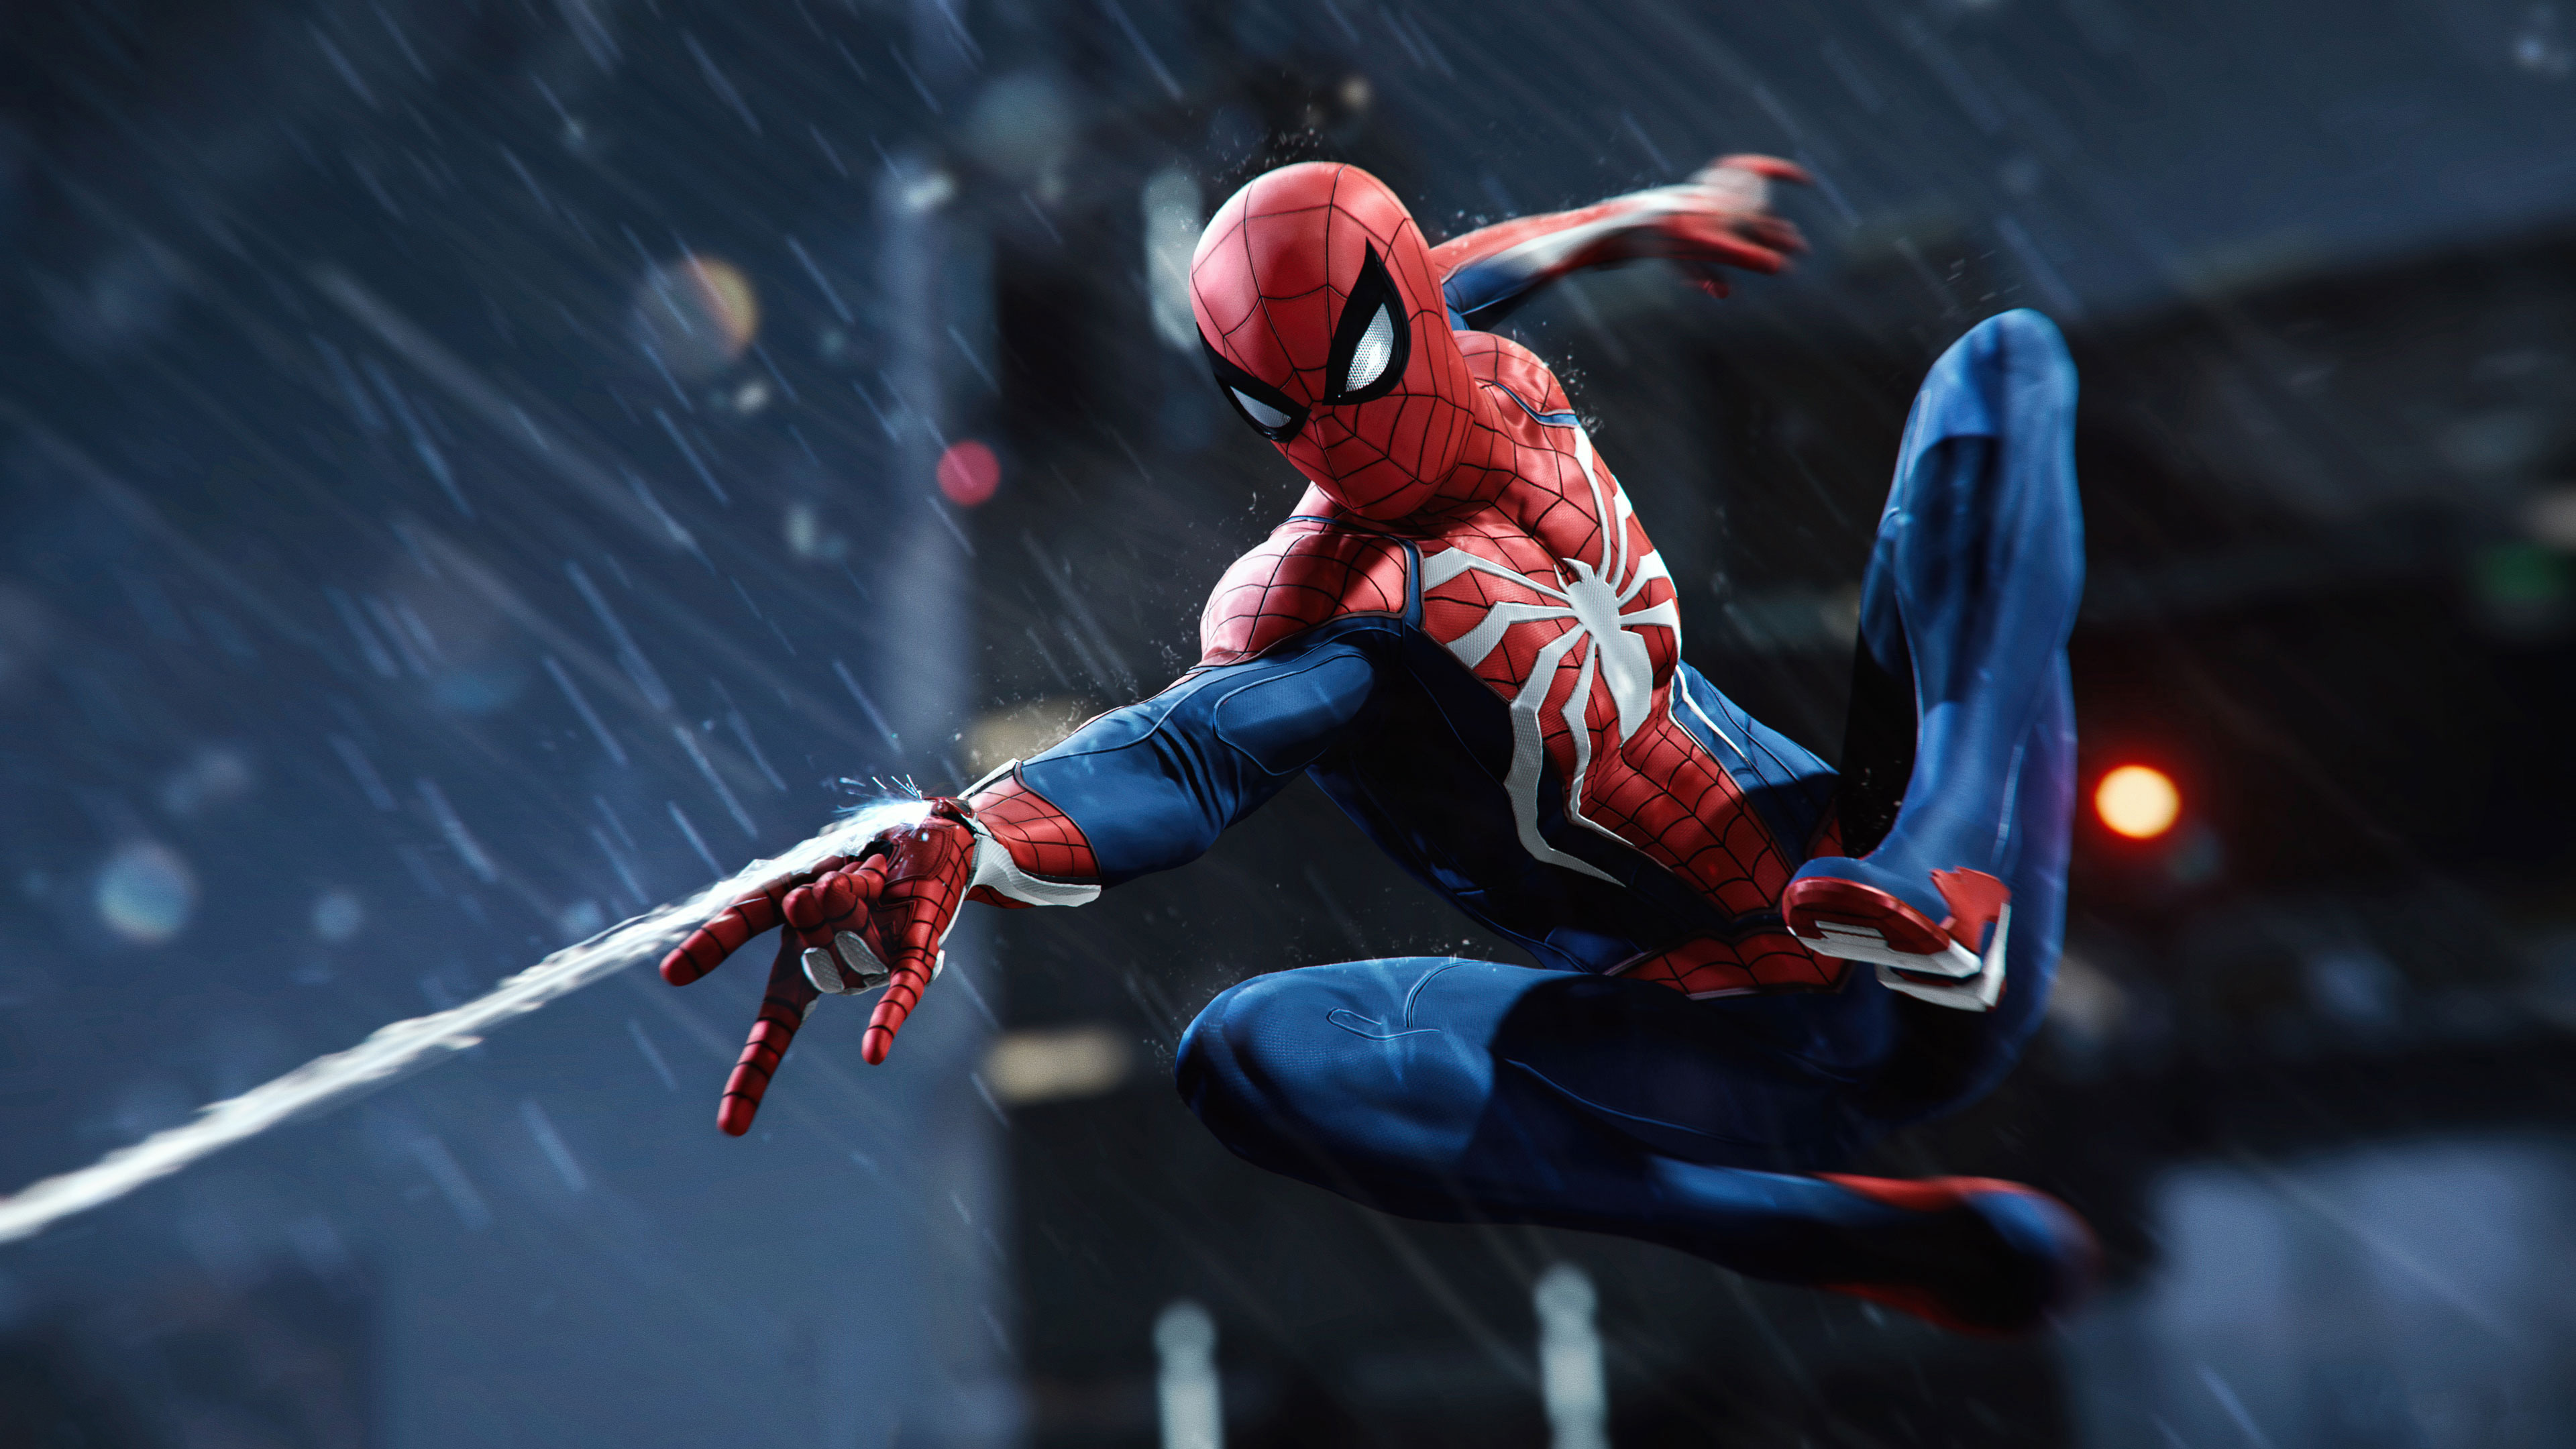 260+ Spider-Man (PS4) HD Wallpapers and Backgrounds